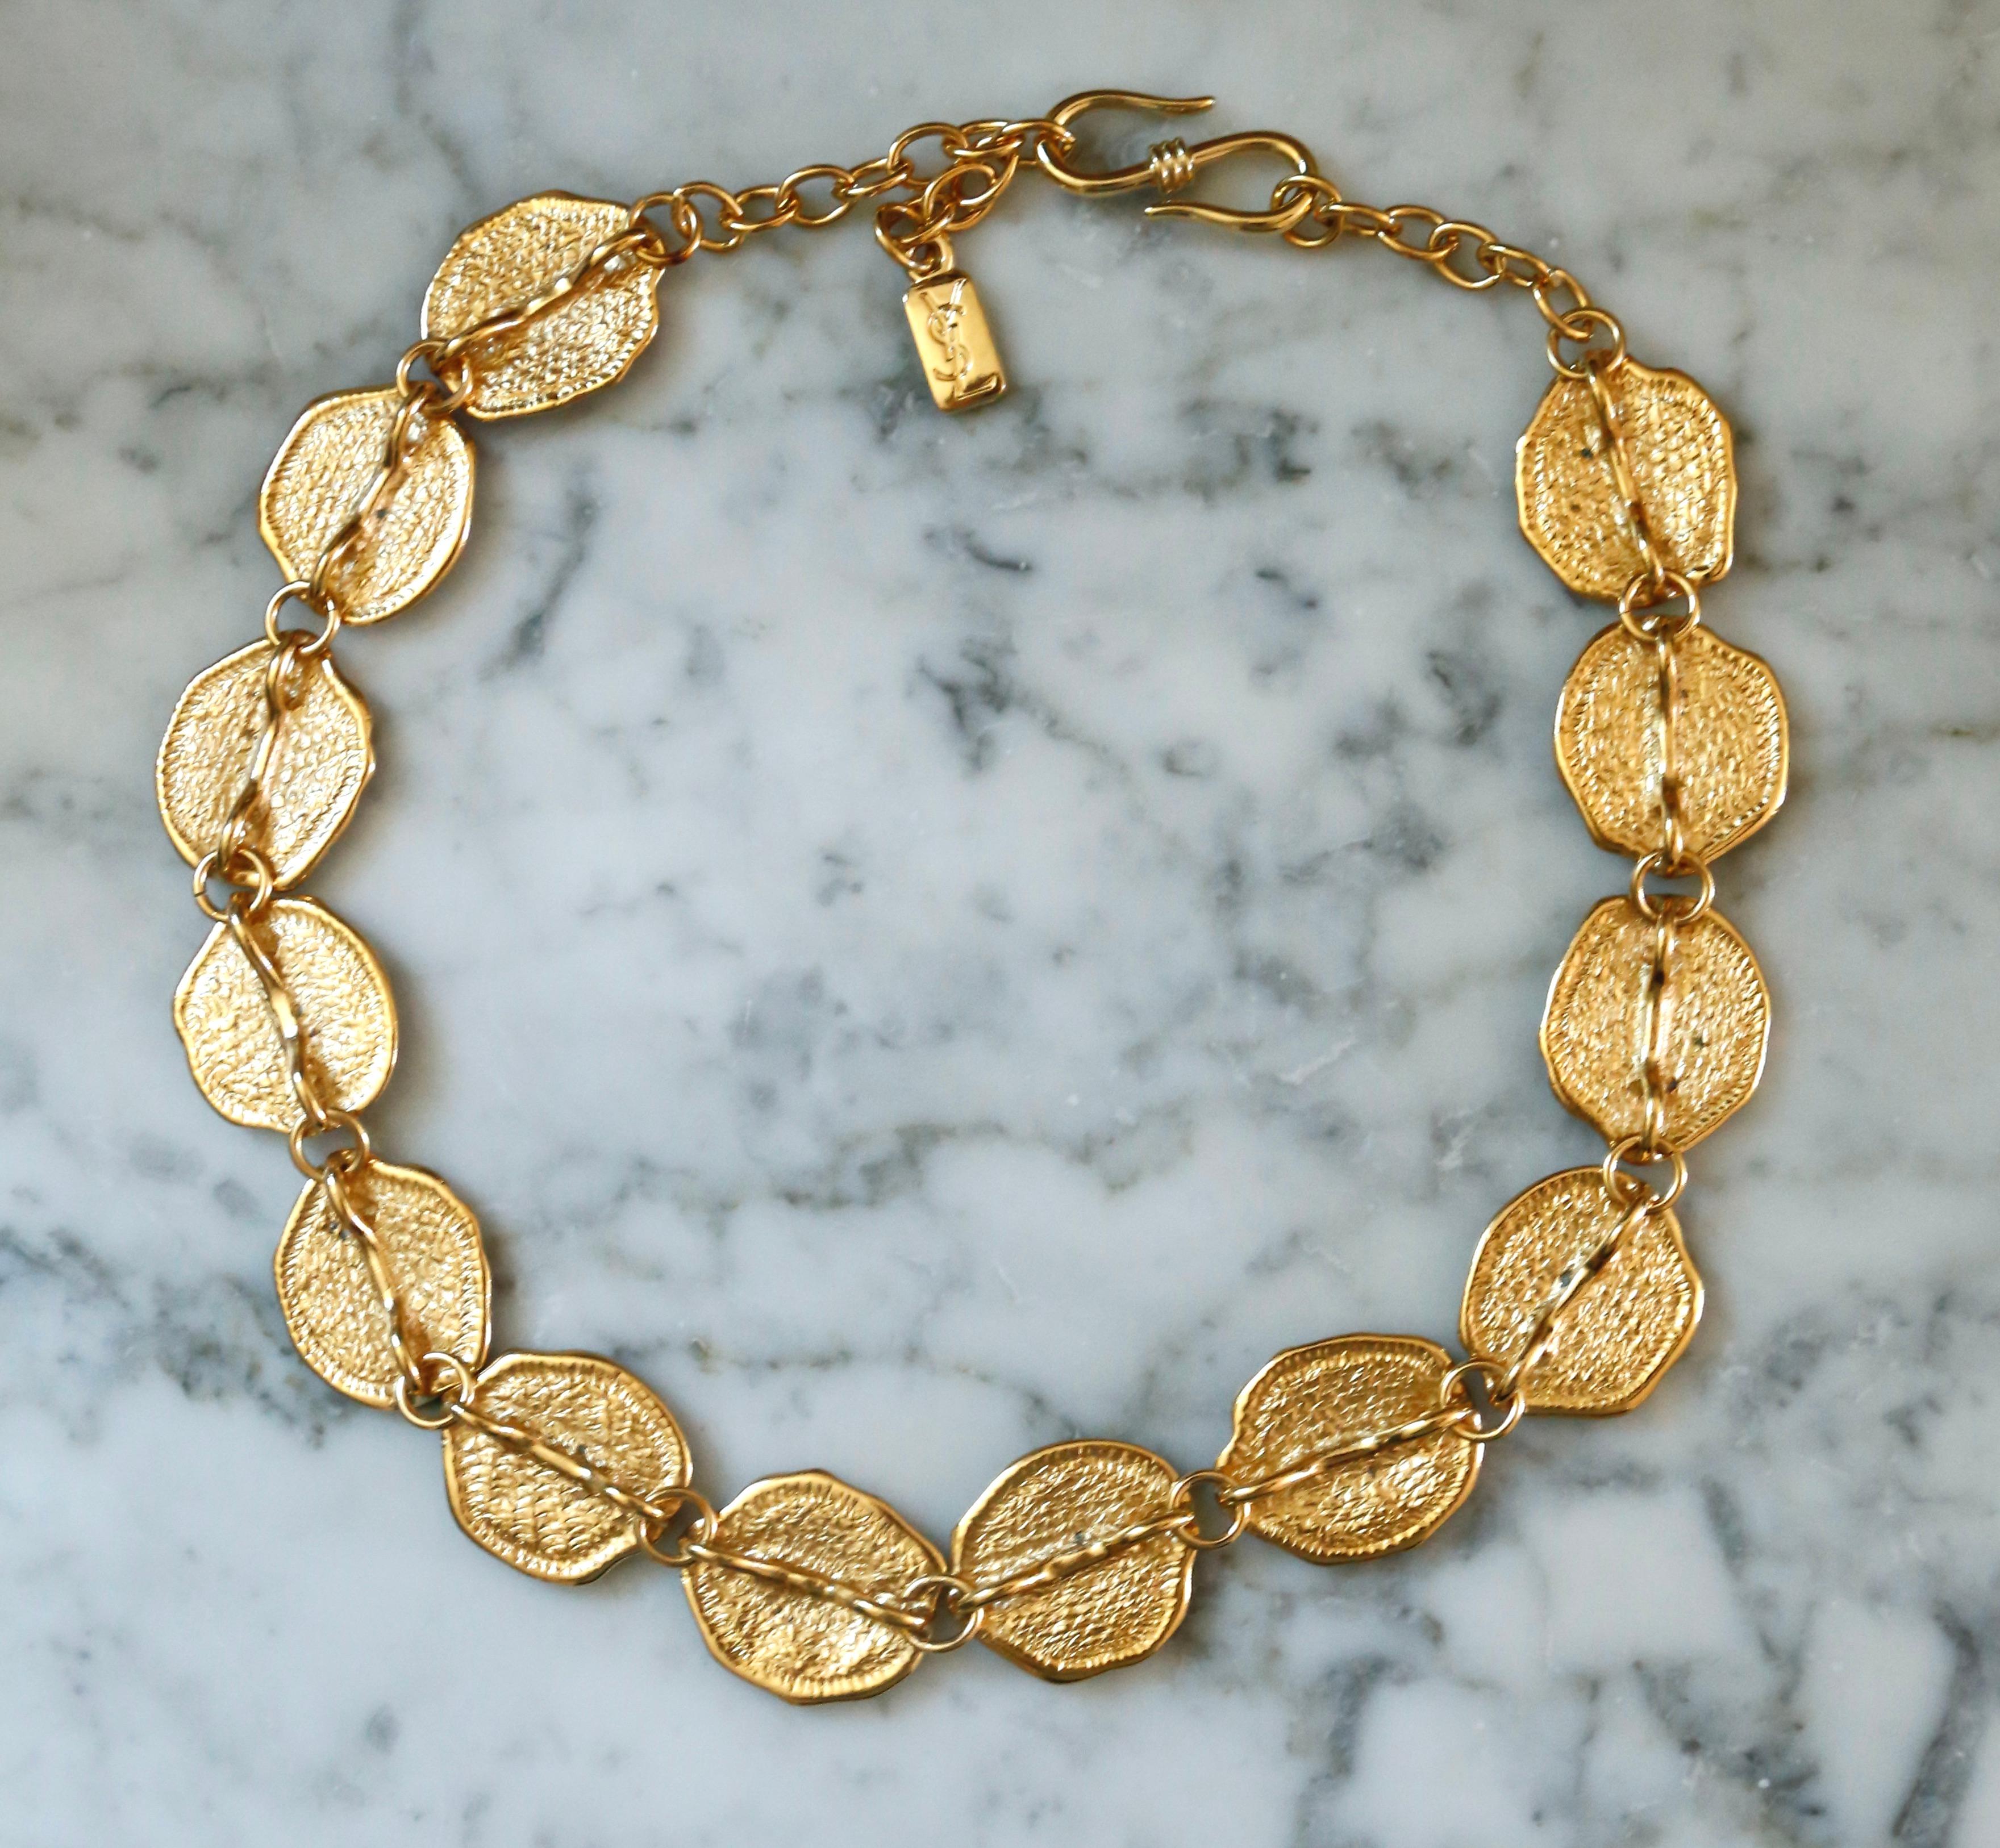 vintage 1990's YVES SAINT LAURENT gilt hammered link necklace with shell detail 1